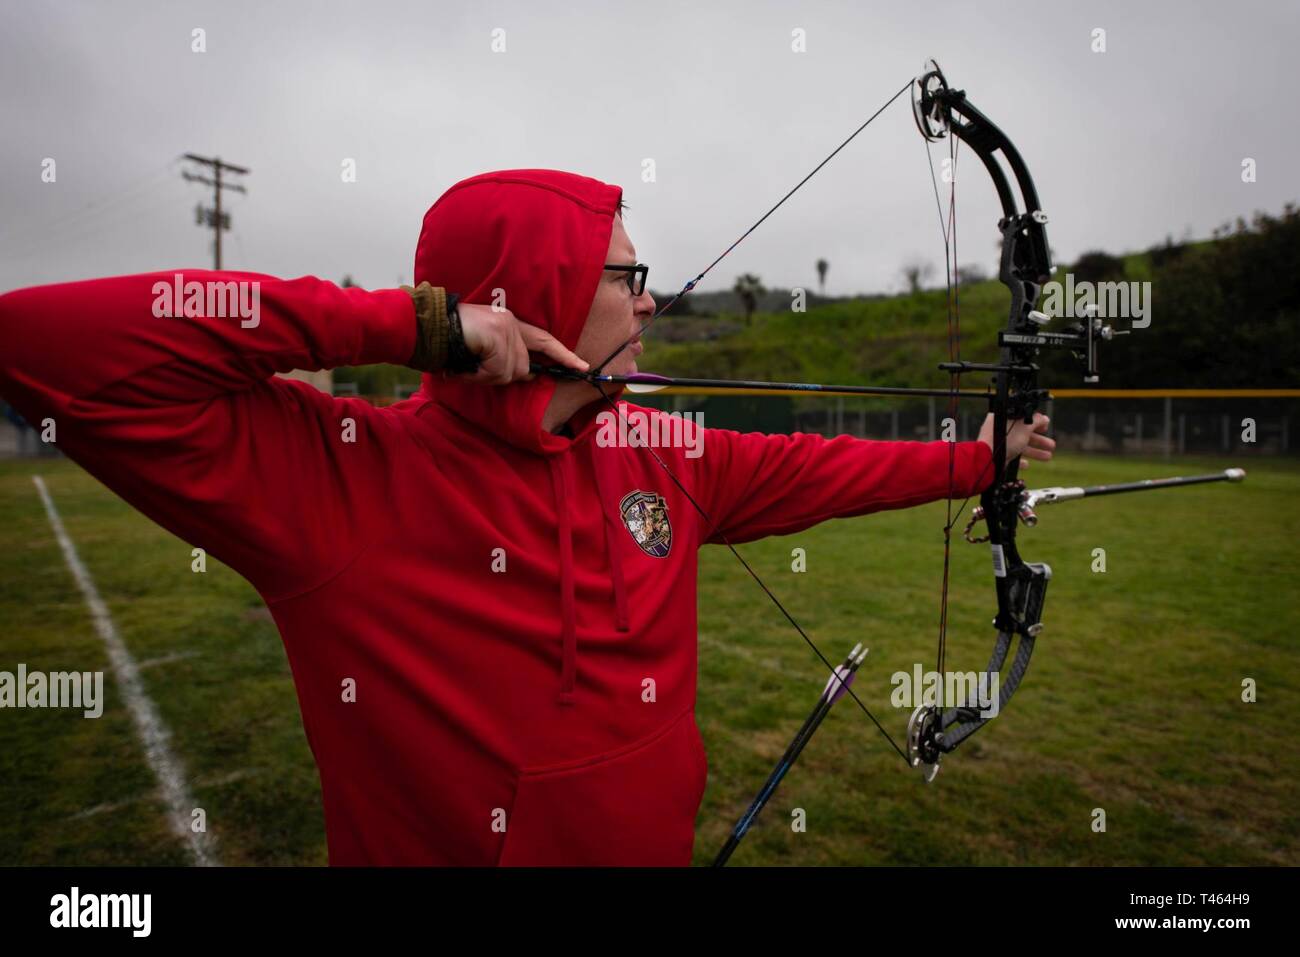 U.S. Marine Corps Cpl. Cameron Kelly participates in the 2019 Marine Corps Trials archery competition at Marine Corps Base Camp Pendleton, California, March 2. The Marine Corps Trials promotes recovery and rehabilitation through adaptive sports participation and develops camaraderie among recovering service members and veterans. Additionally, the competition is an opportunity for participants to demonstrate physical and mental achievements and serves as the primary venue to select Marine Corps participants for the DoD Warrior Games. (Official U.S. Marine Corps Stock Photo